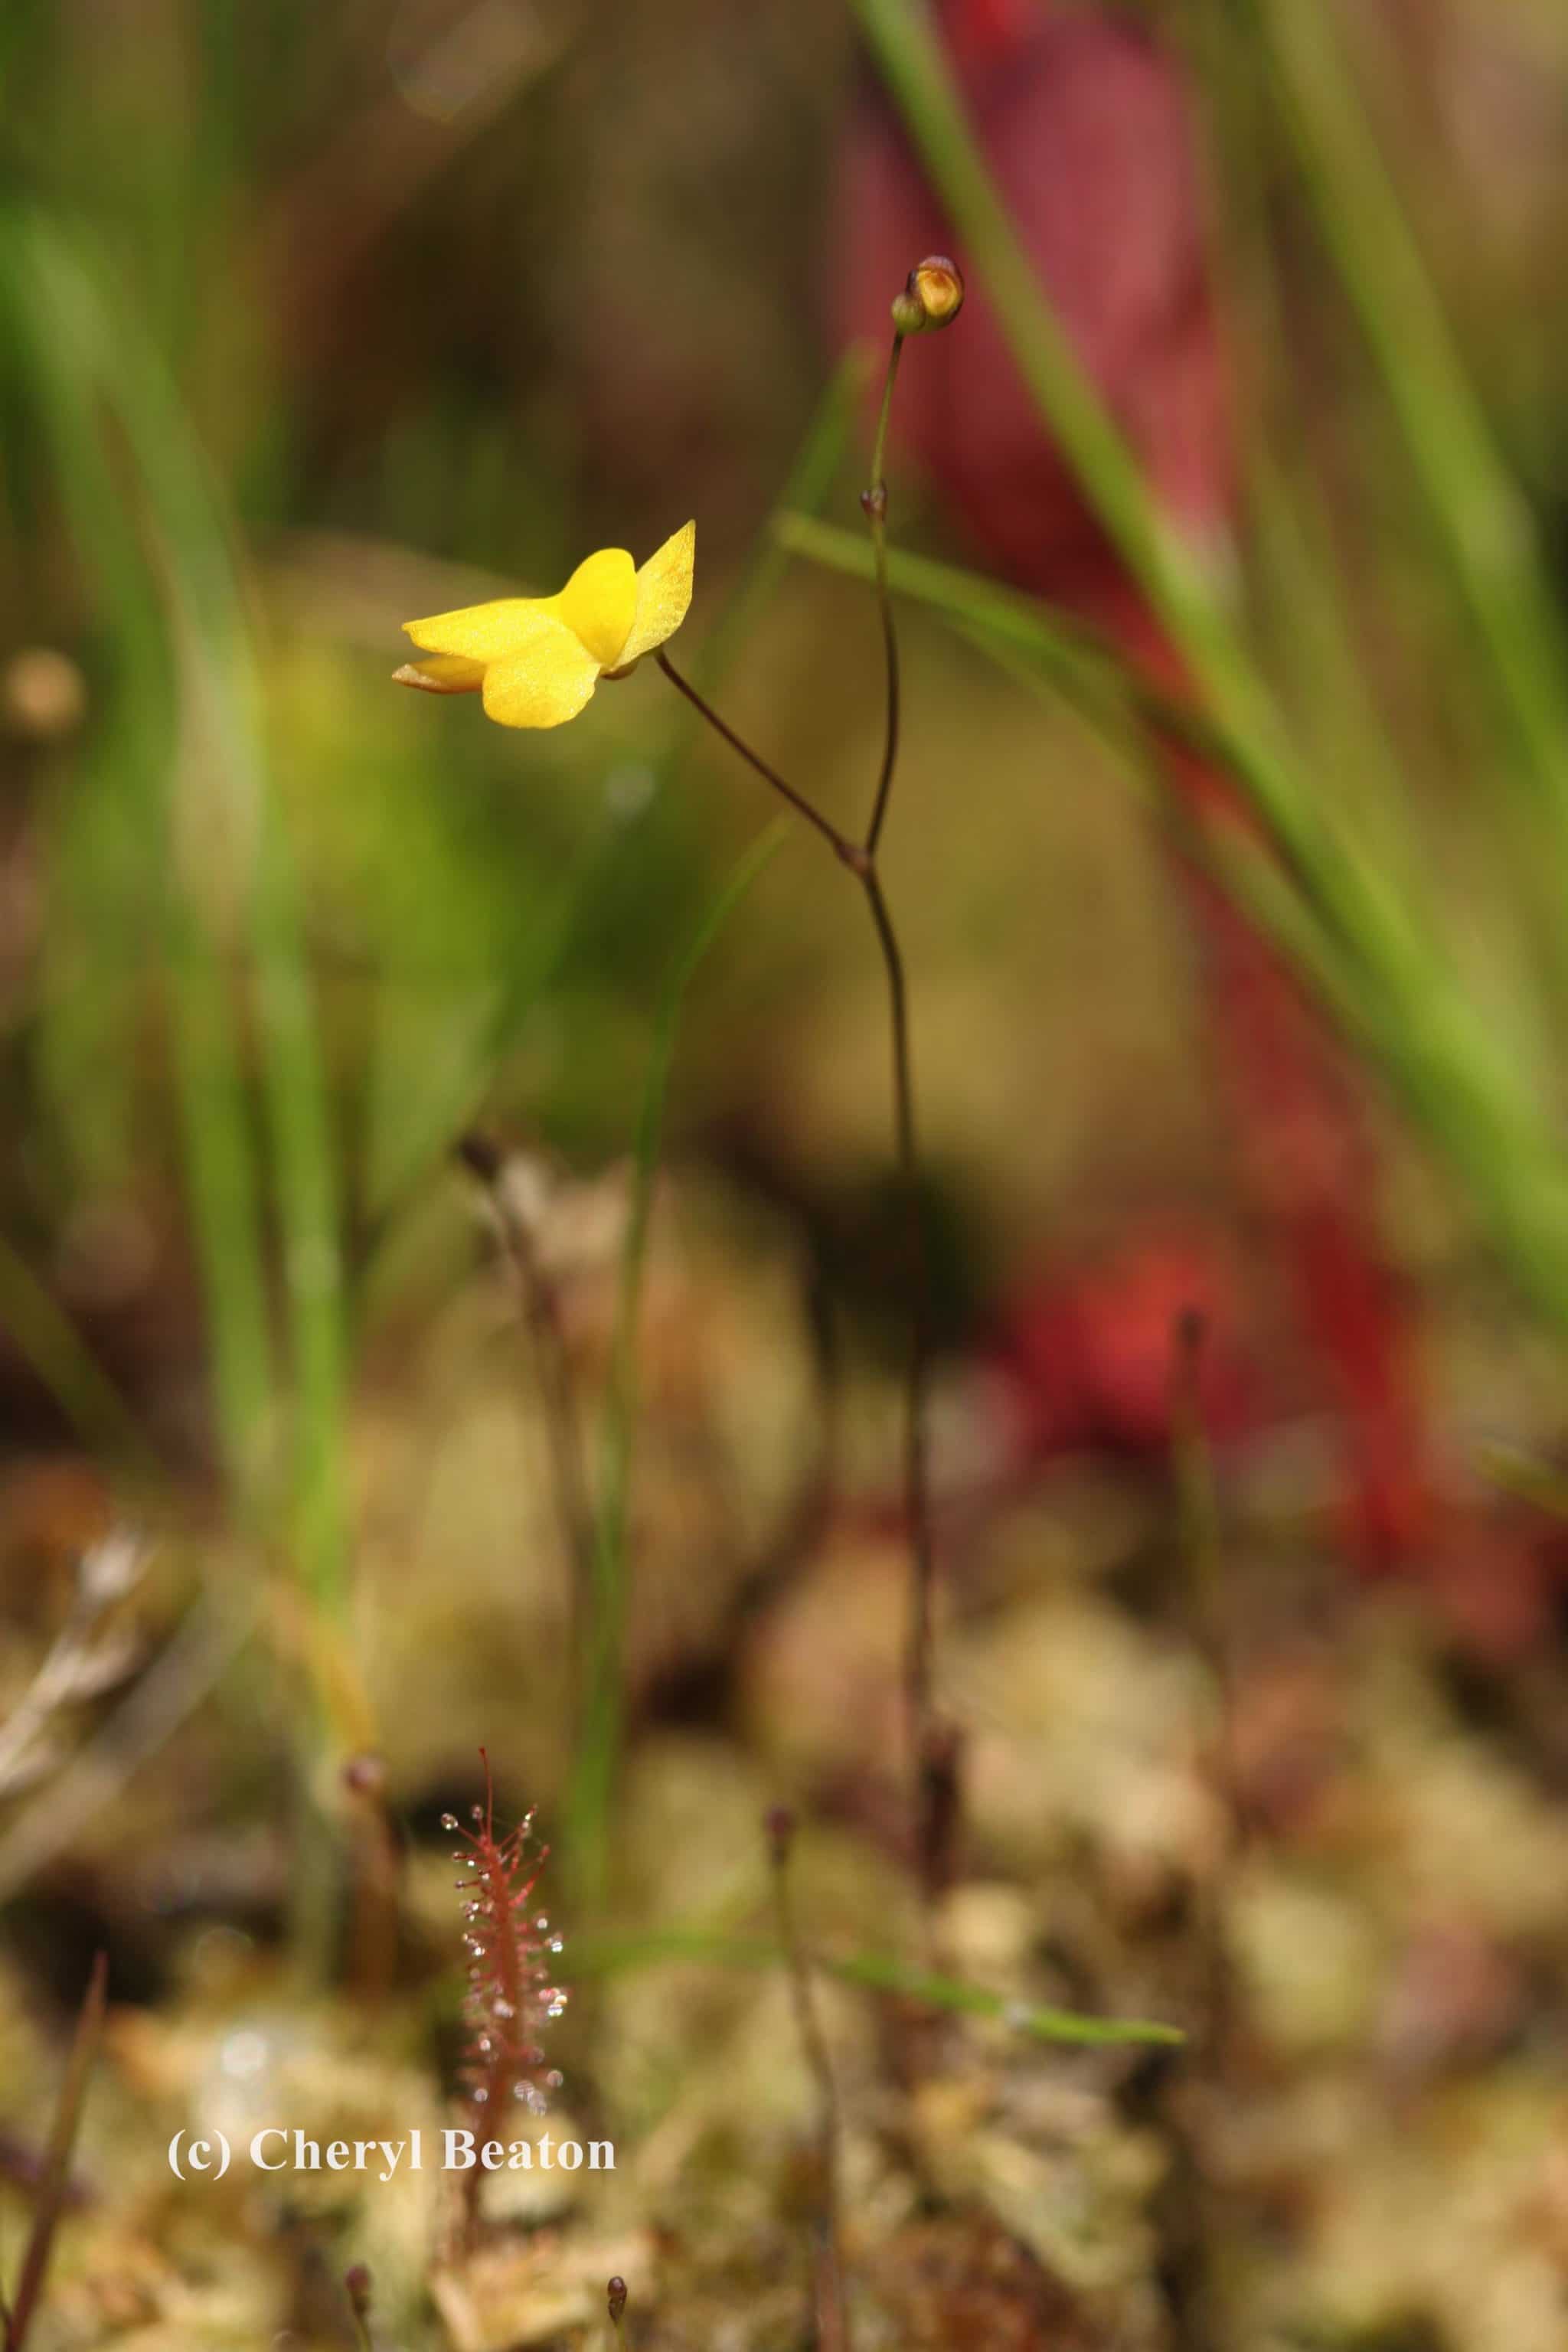 A single stalk with a few delicate flowers is the only visible part of the bladderwort plant.